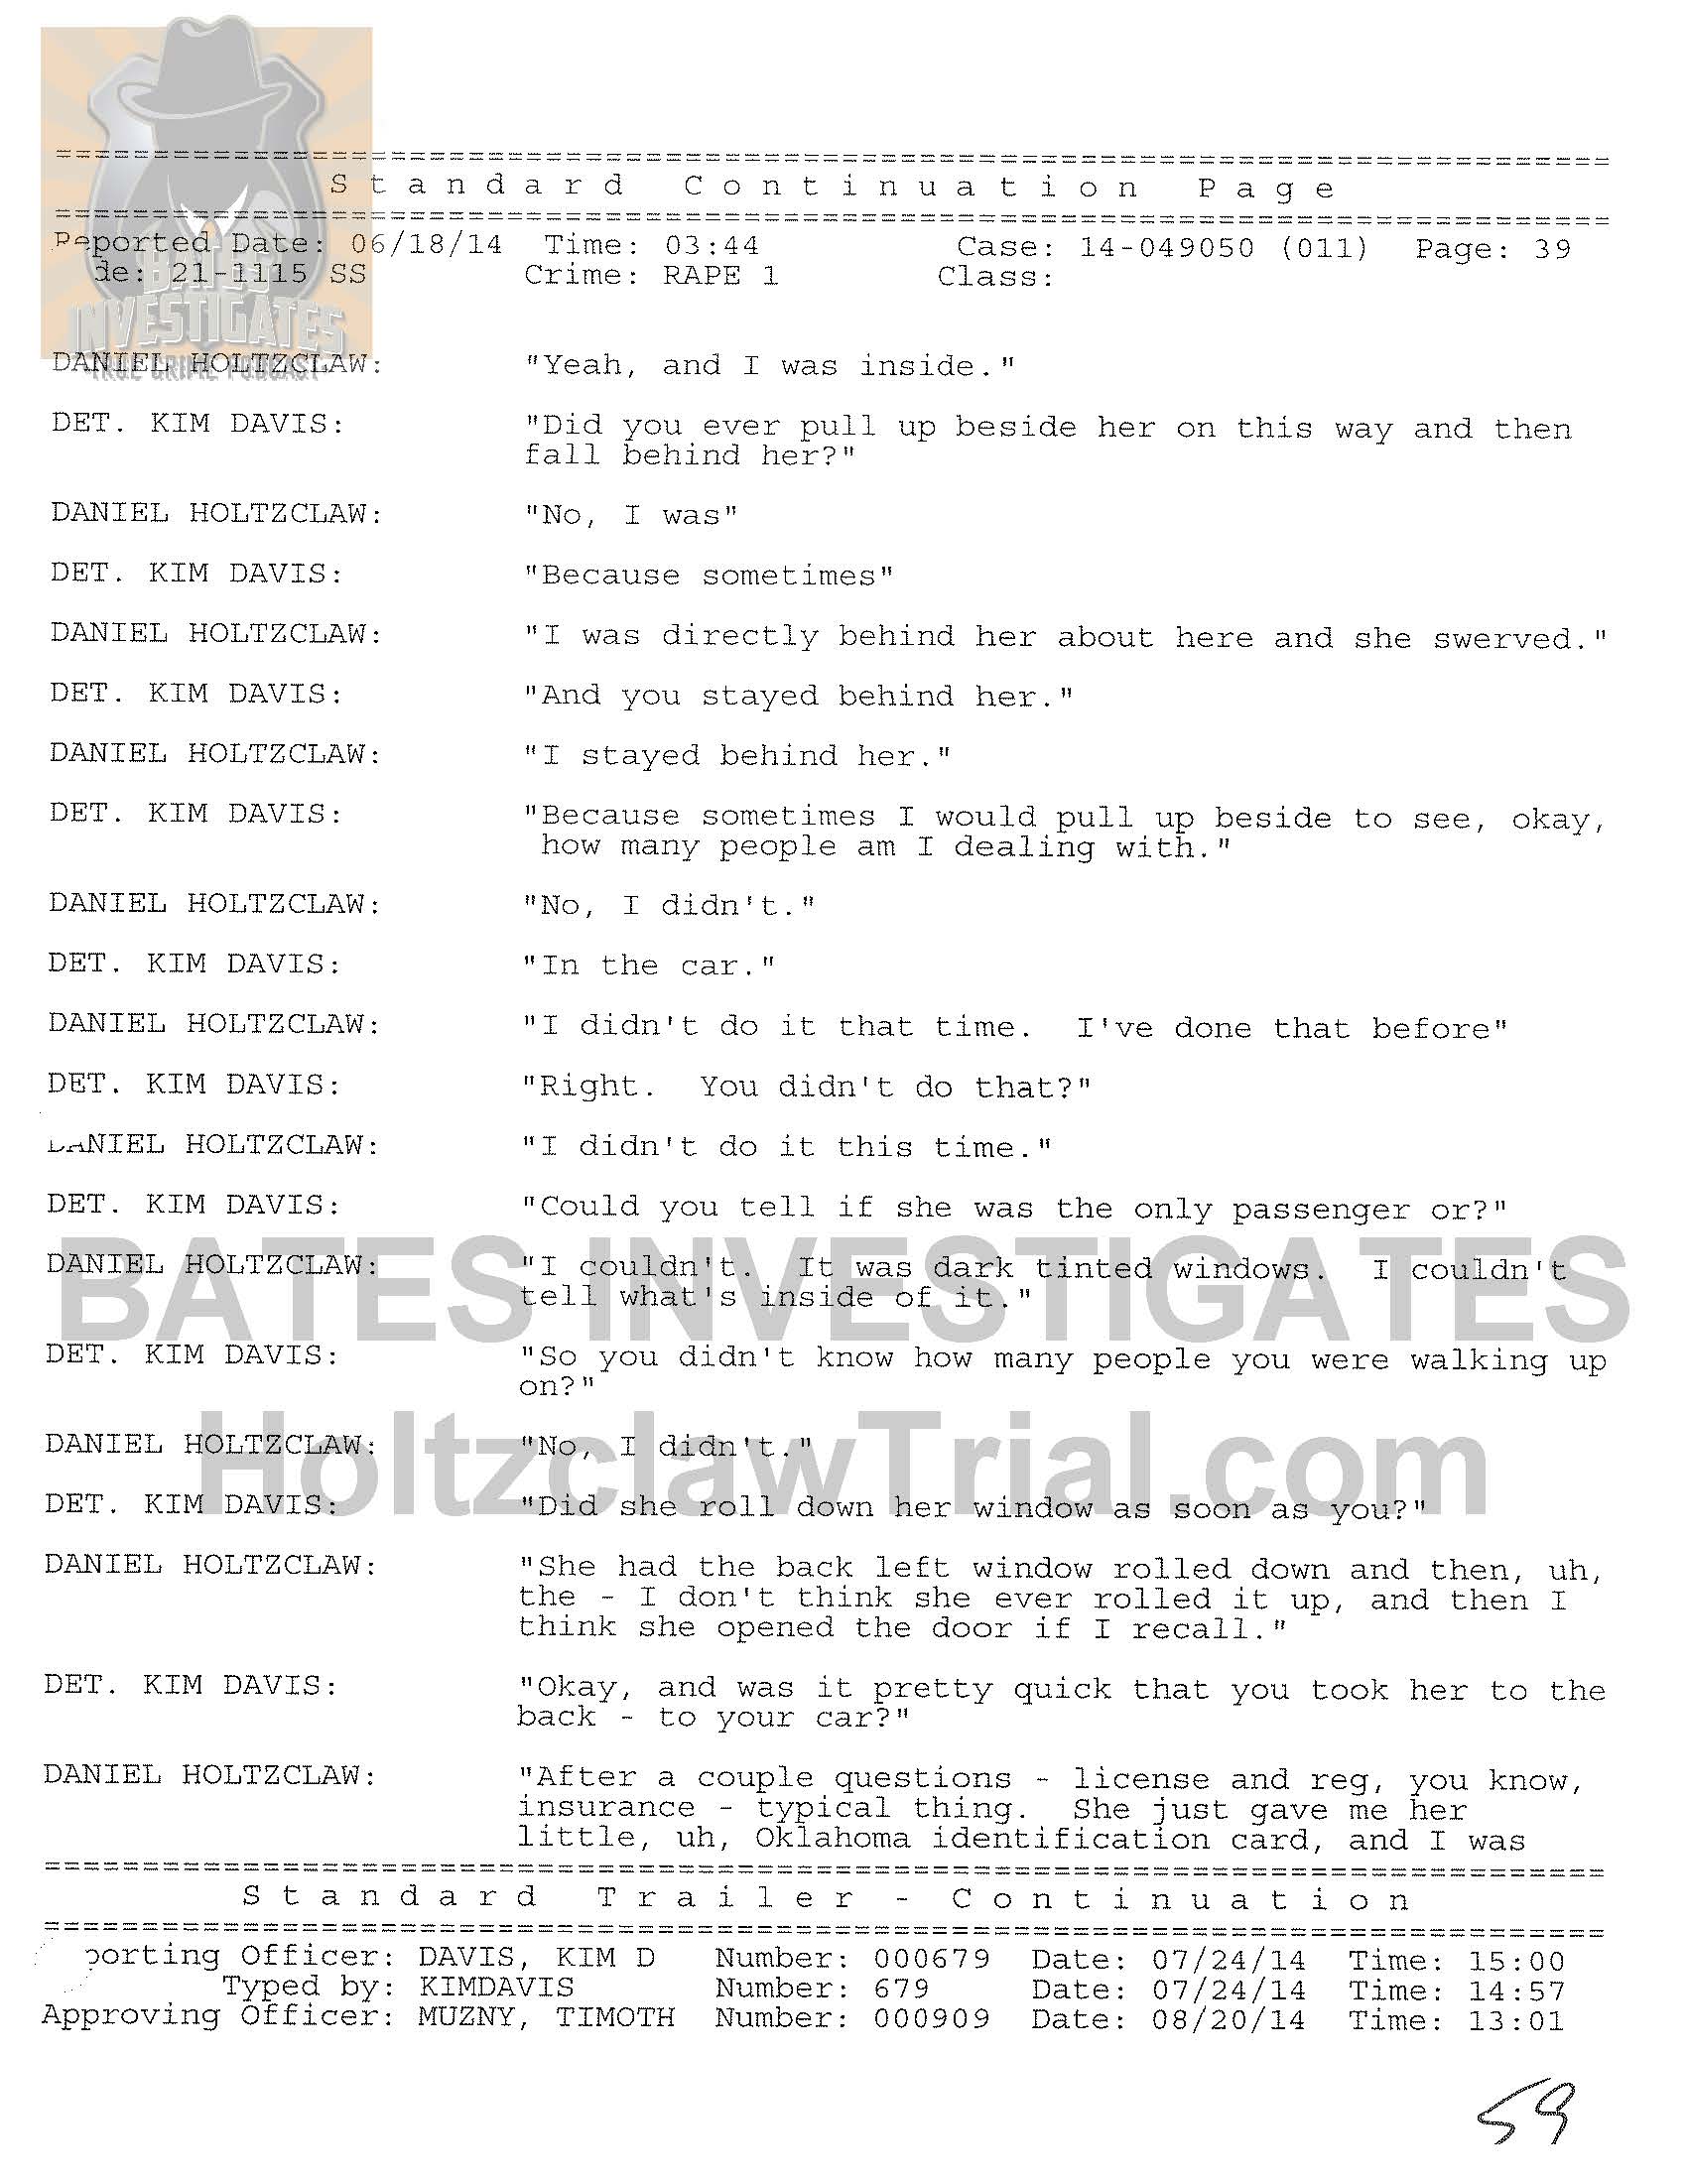 Holtzclaw Interrogation Transcript - Ep02 Redacted_Page_39.jpg